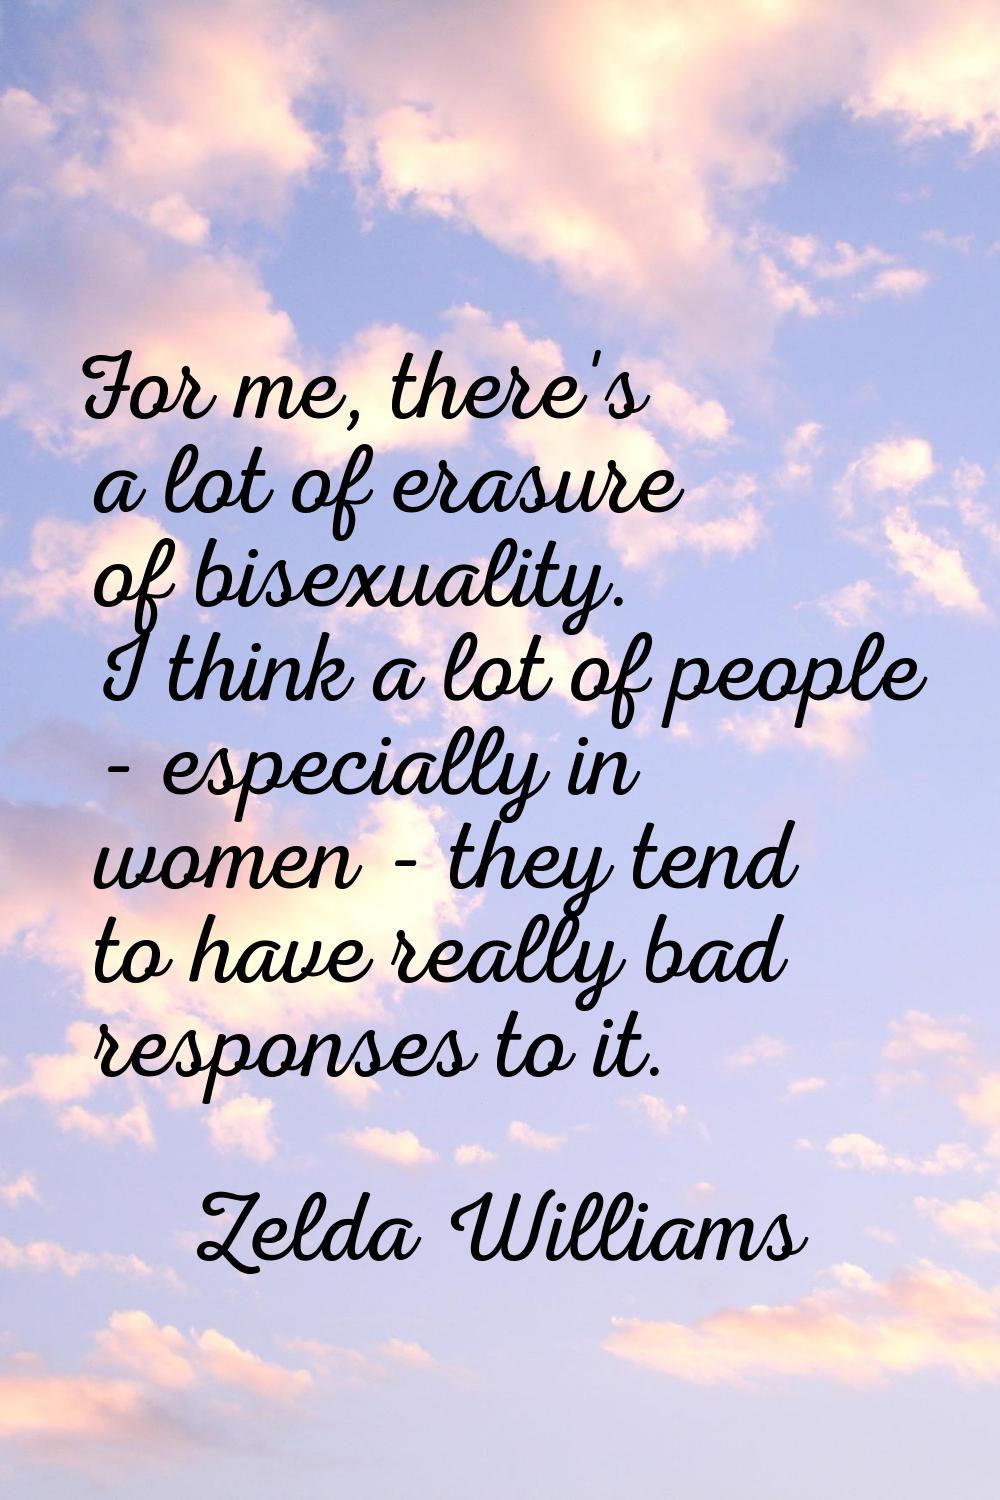 For me, there's a lot of erasure of bisexuality. I think a lot of people - especially in women - th